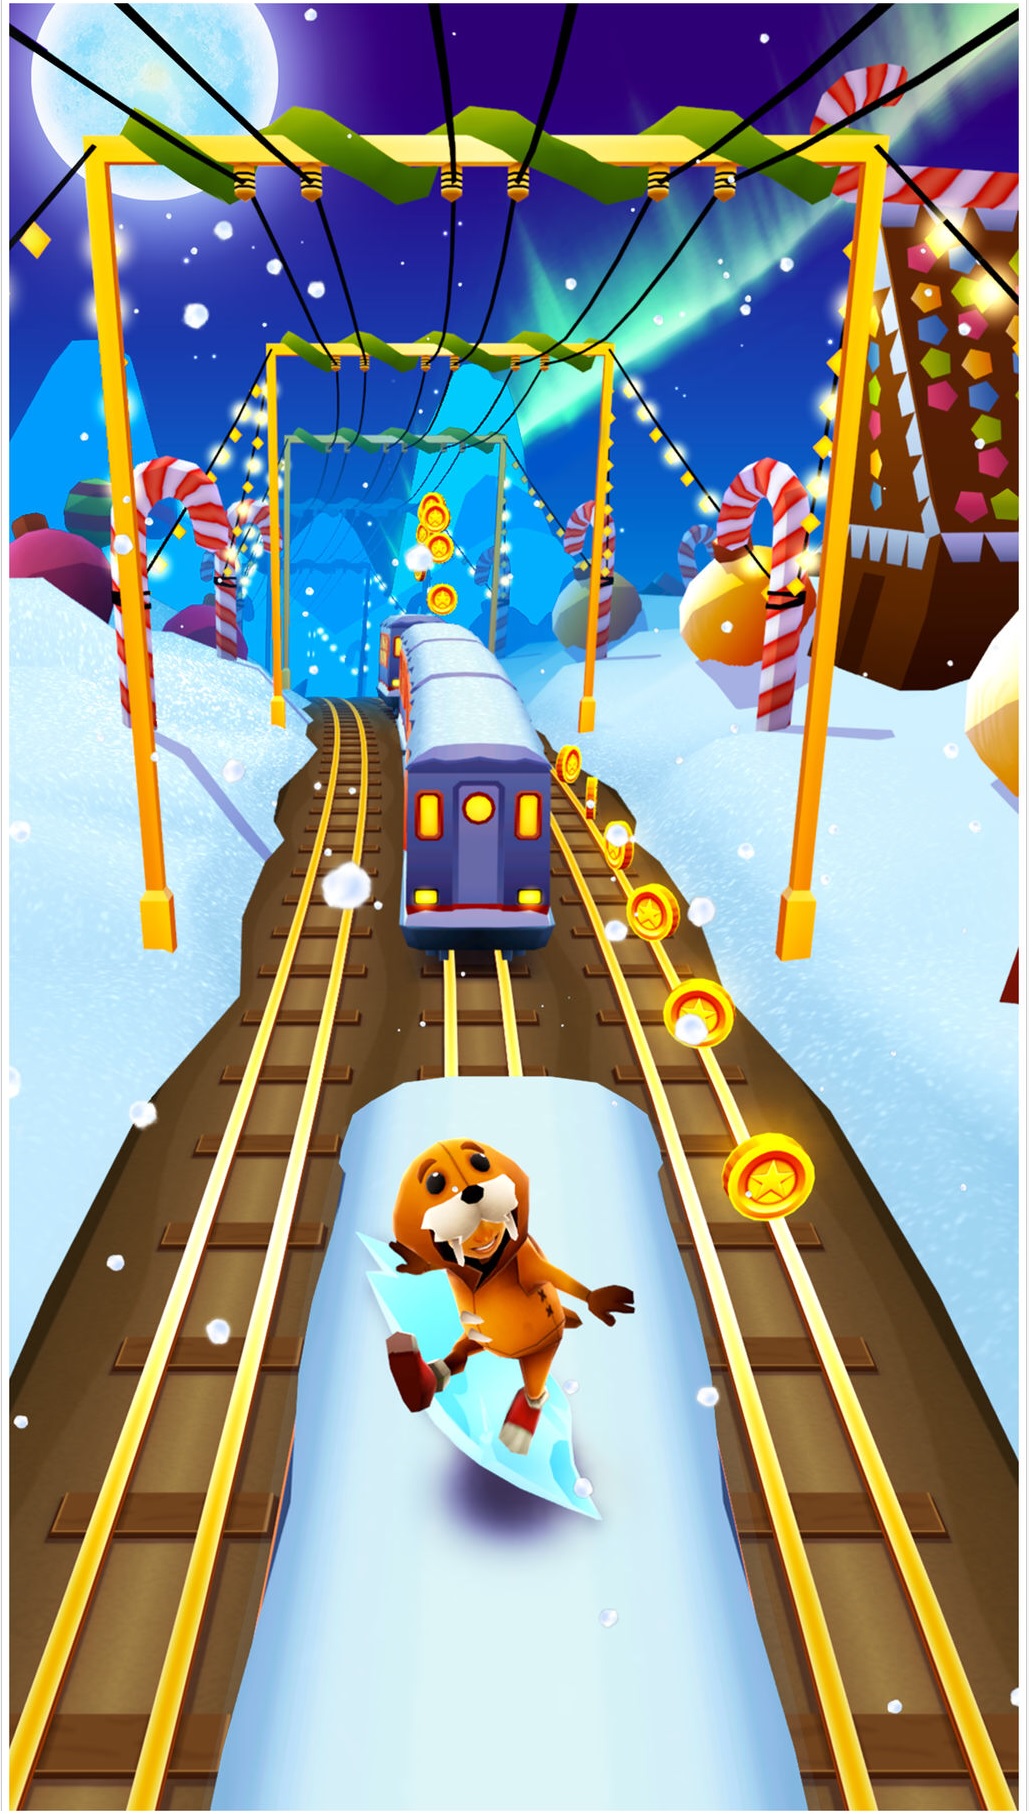 Subway Surfers 1.44.1 apk Modded Unlimited New York USA